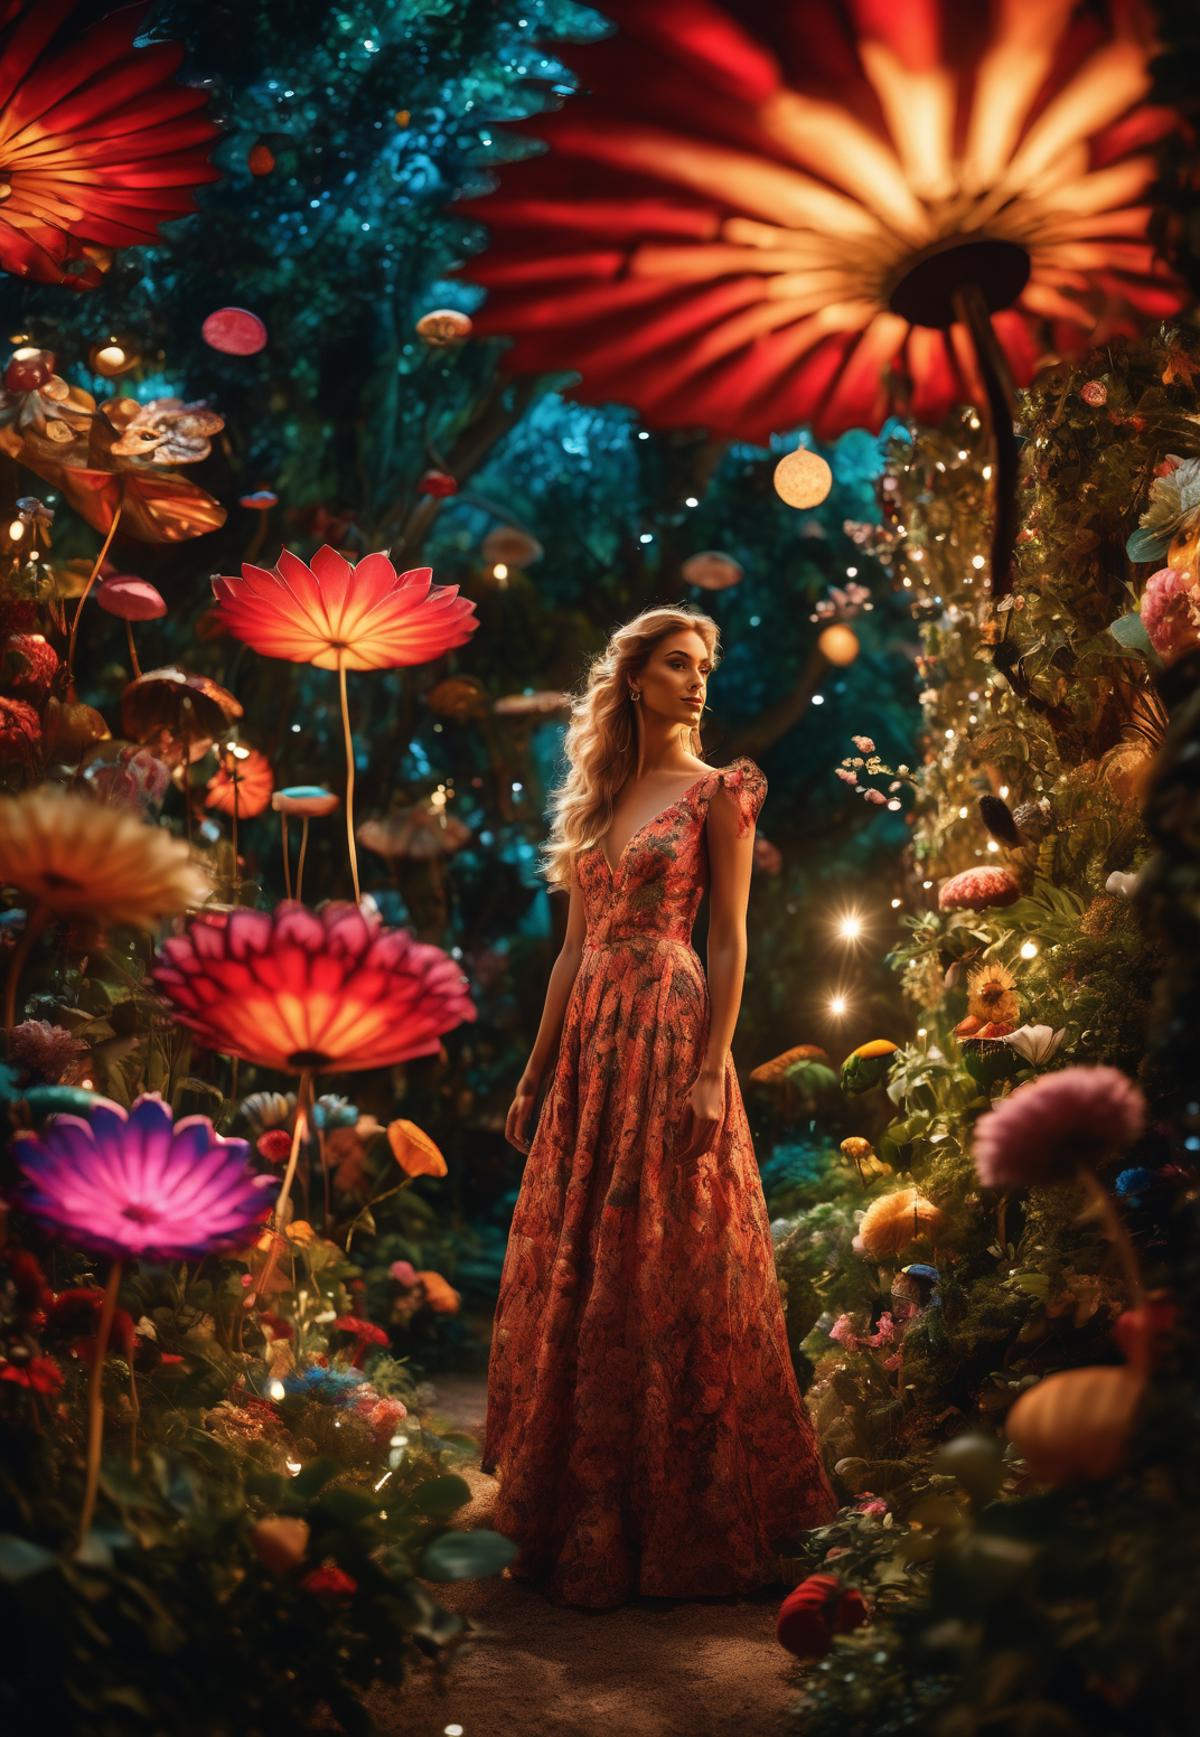 A woman in a pink dress walking through a garden filled with colorful flowers.